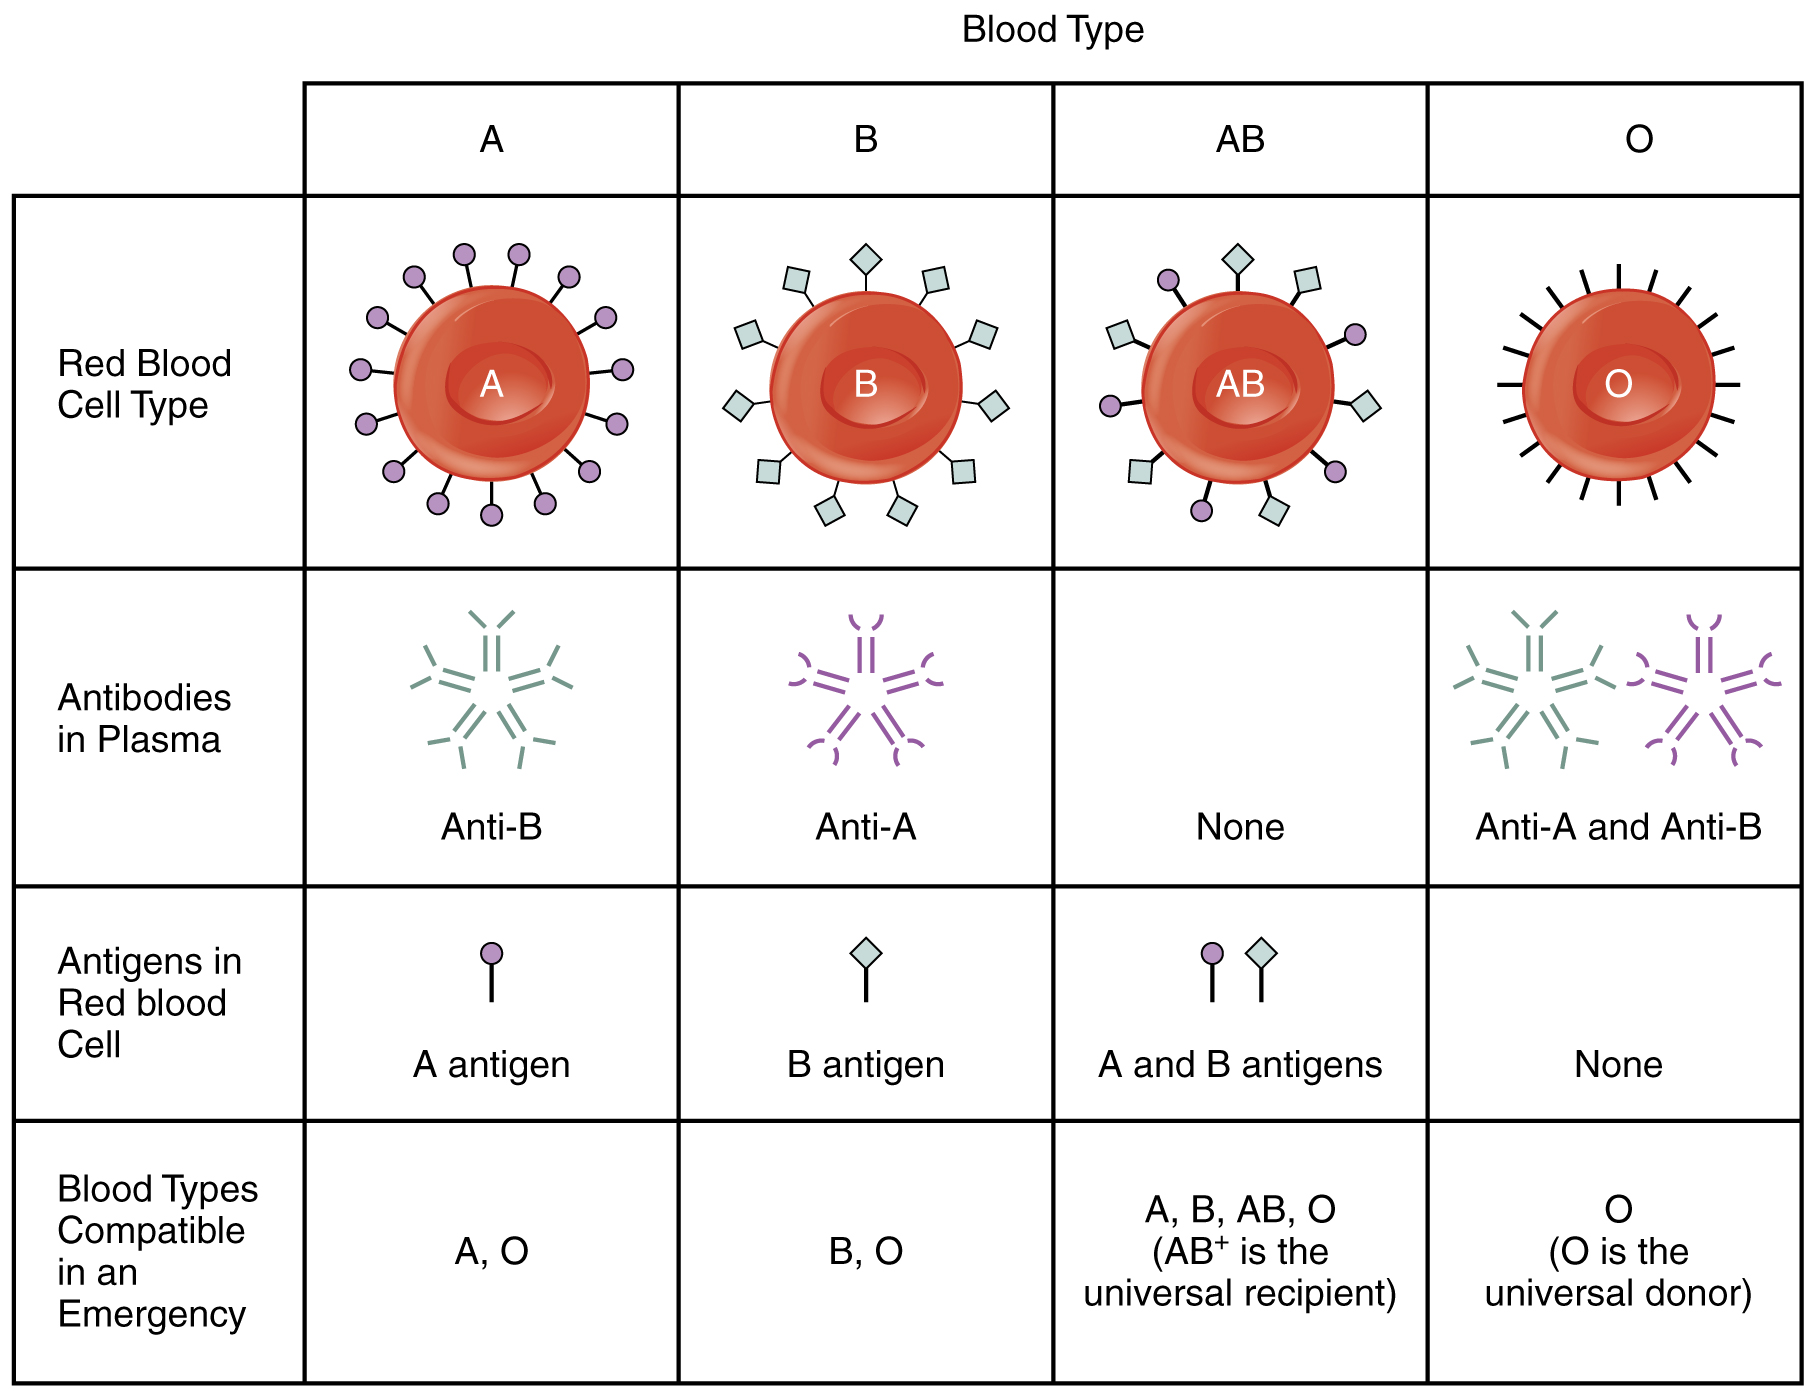 Table summarizing the characteristics of each ABO blood type including which antigen(s) (if any) are present on the surface of red blood cells, which antibodies circulate in the blood plasma, which blood types can be safely received, and to which blood types the blood can be safely donated.